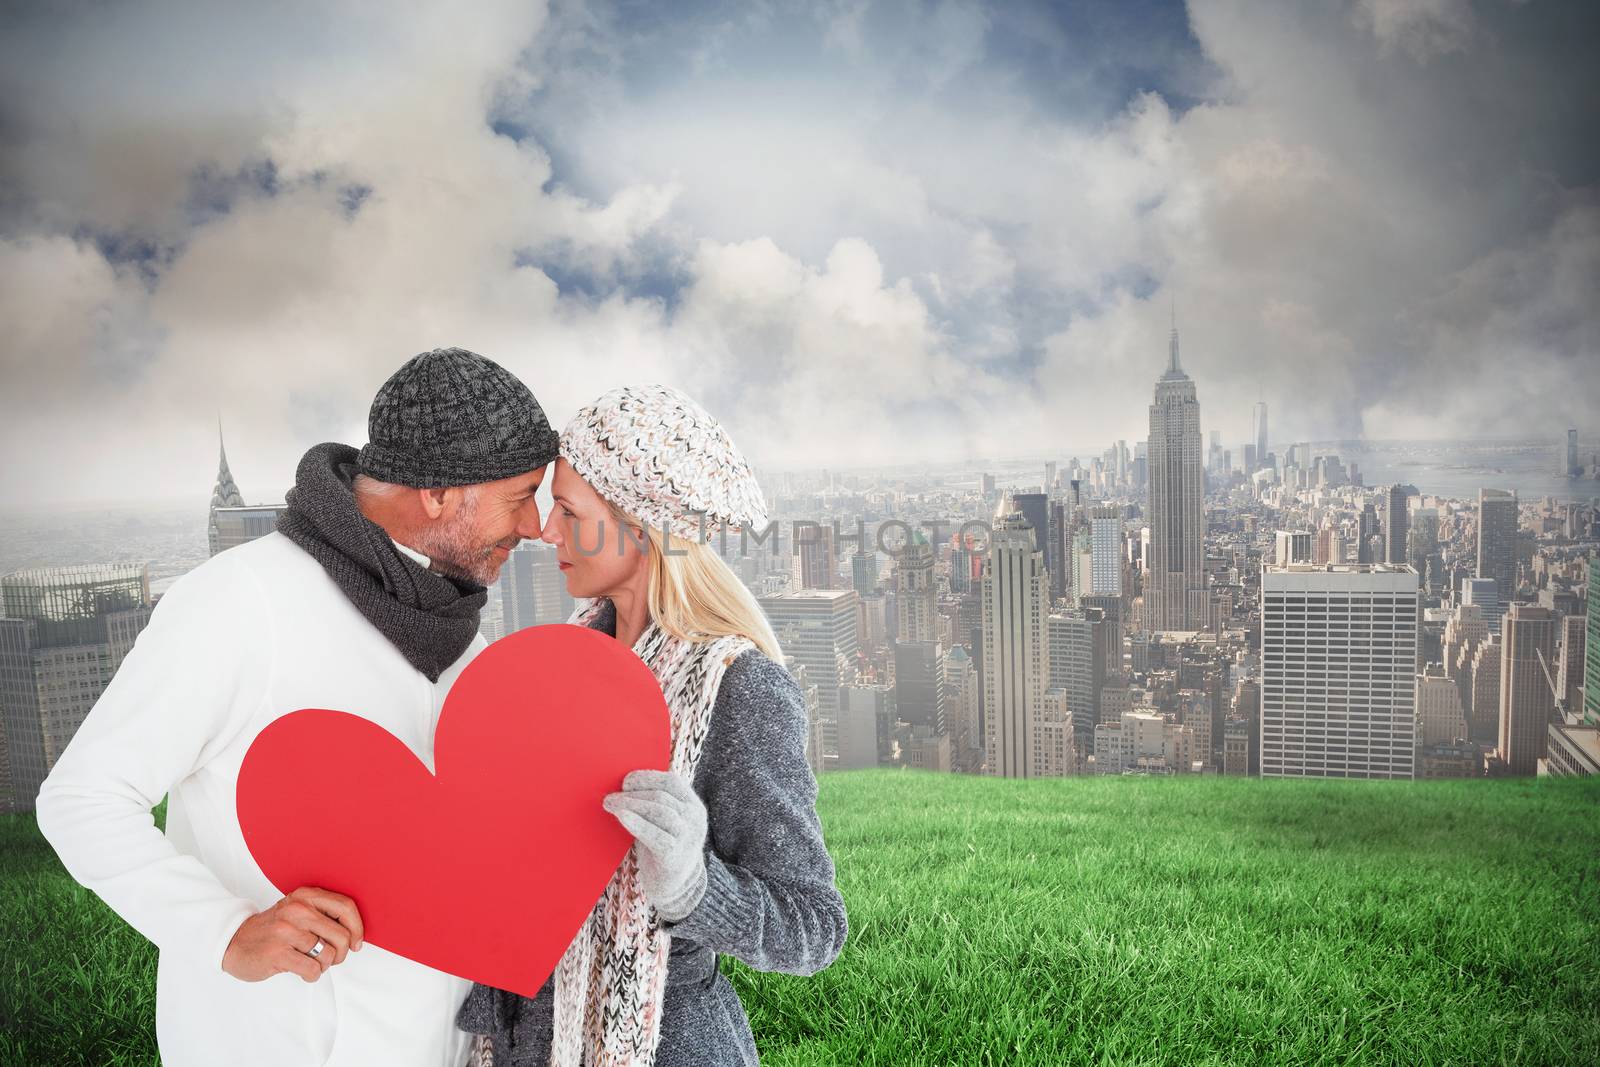 Smiling couple in winter fashion posing with heart shape against cloudy sky over city